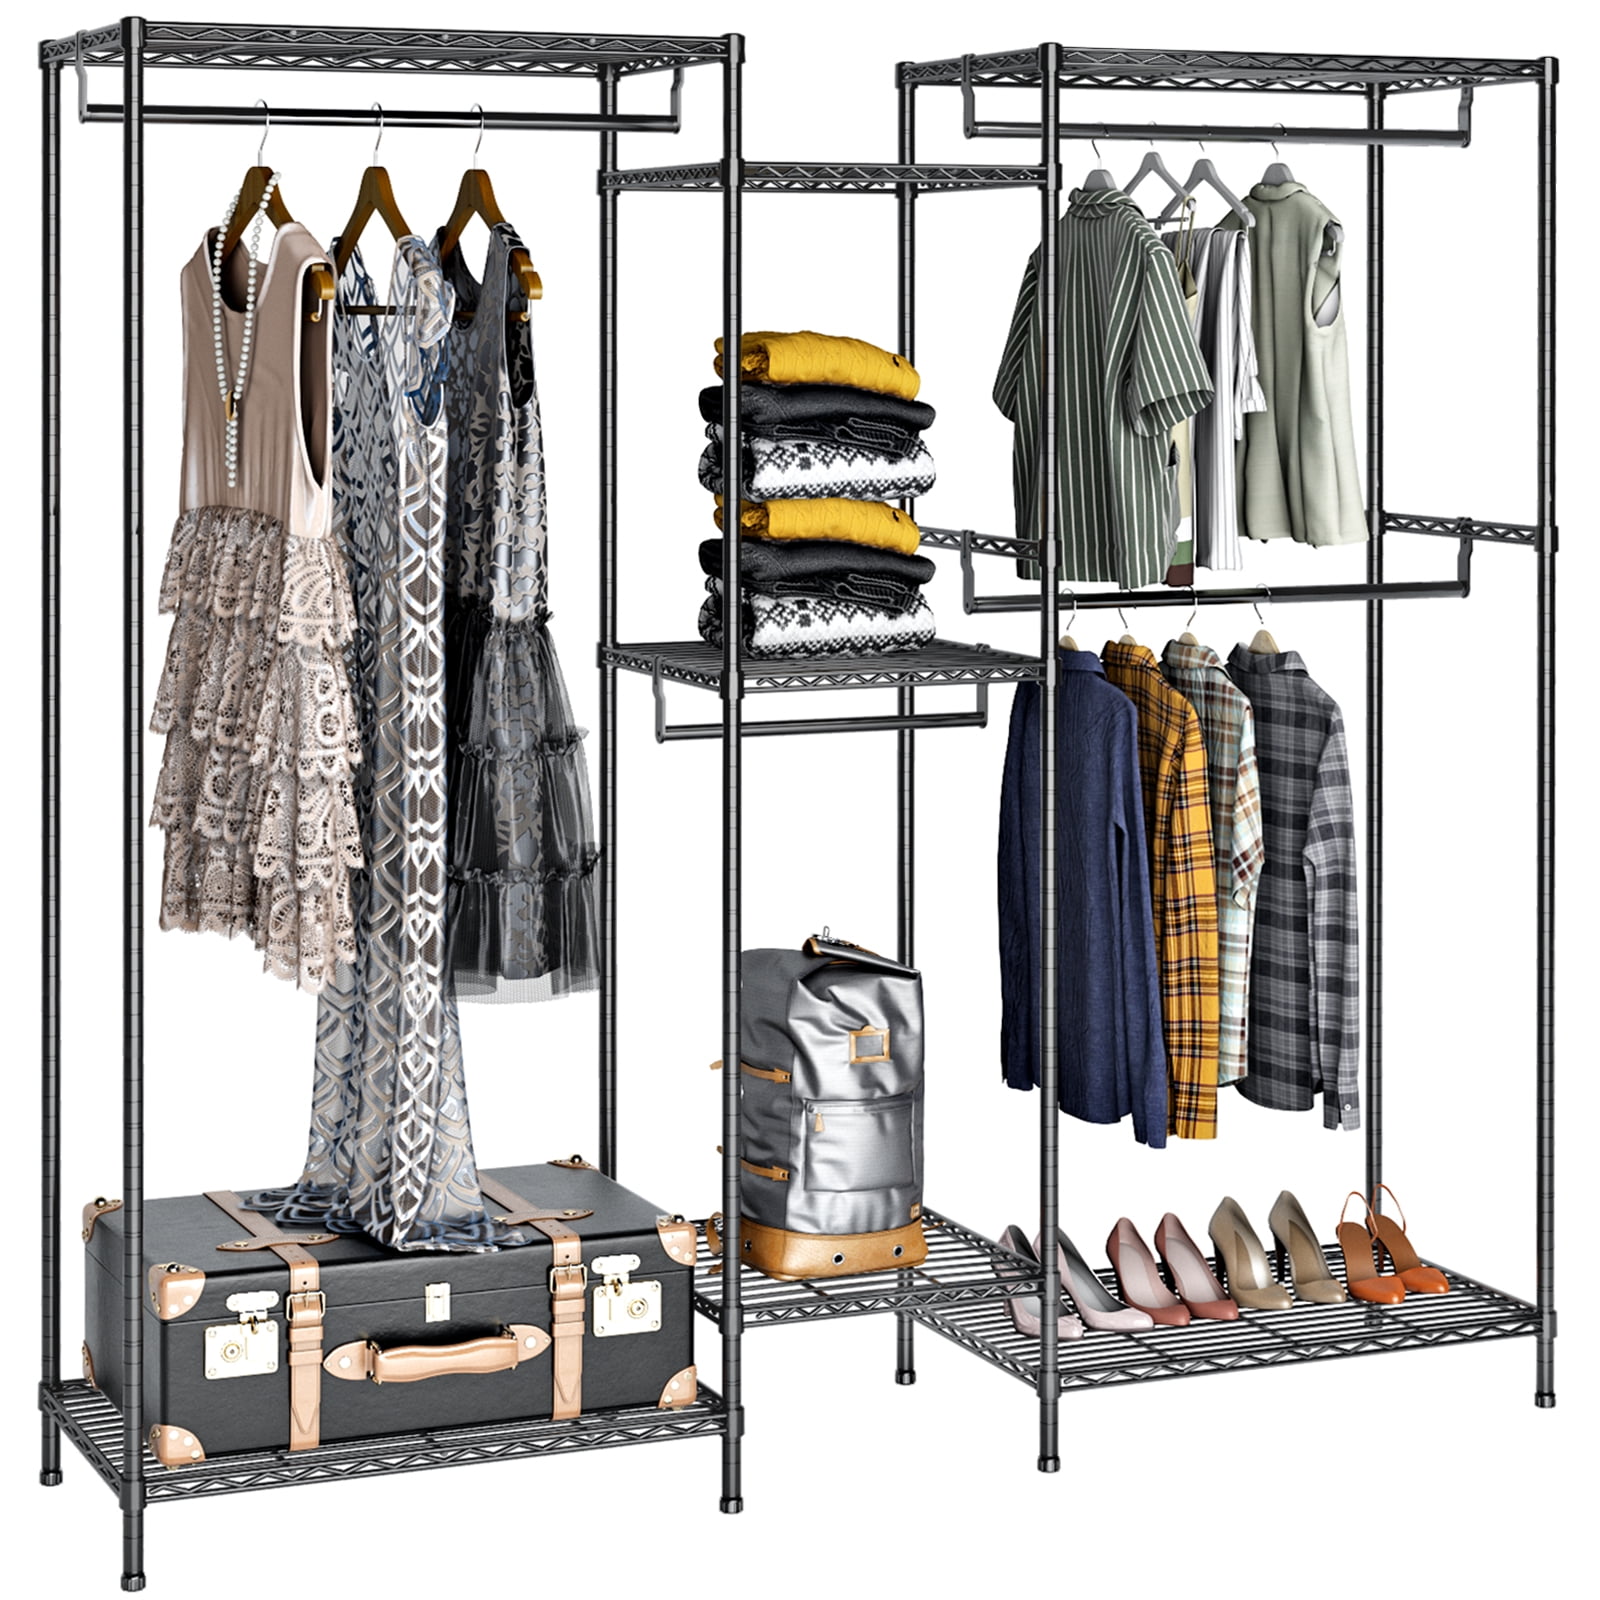 VIPEK V6 5 Tiers Wire Garment Rack Heavy Duty Clothes Rack for Hanging ...